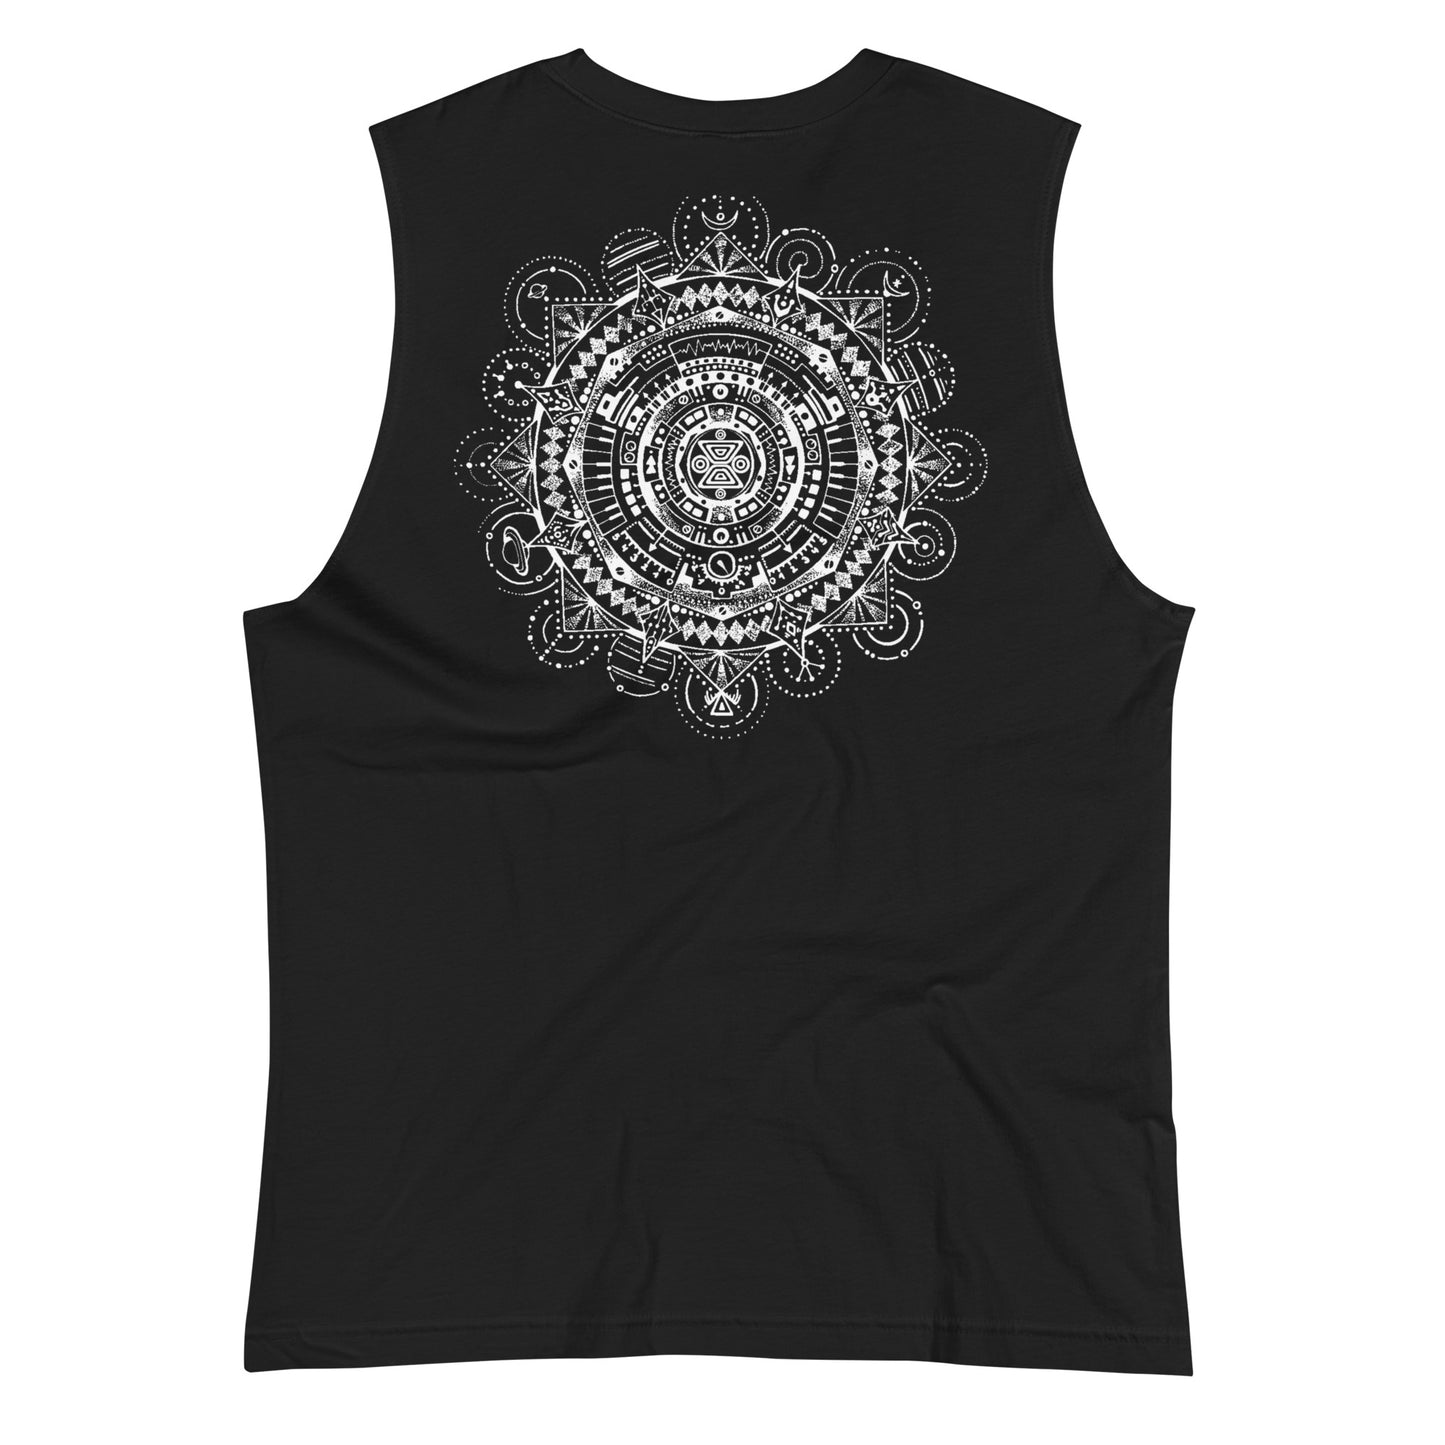 Muscle Shirt "Found in a Forest" white print